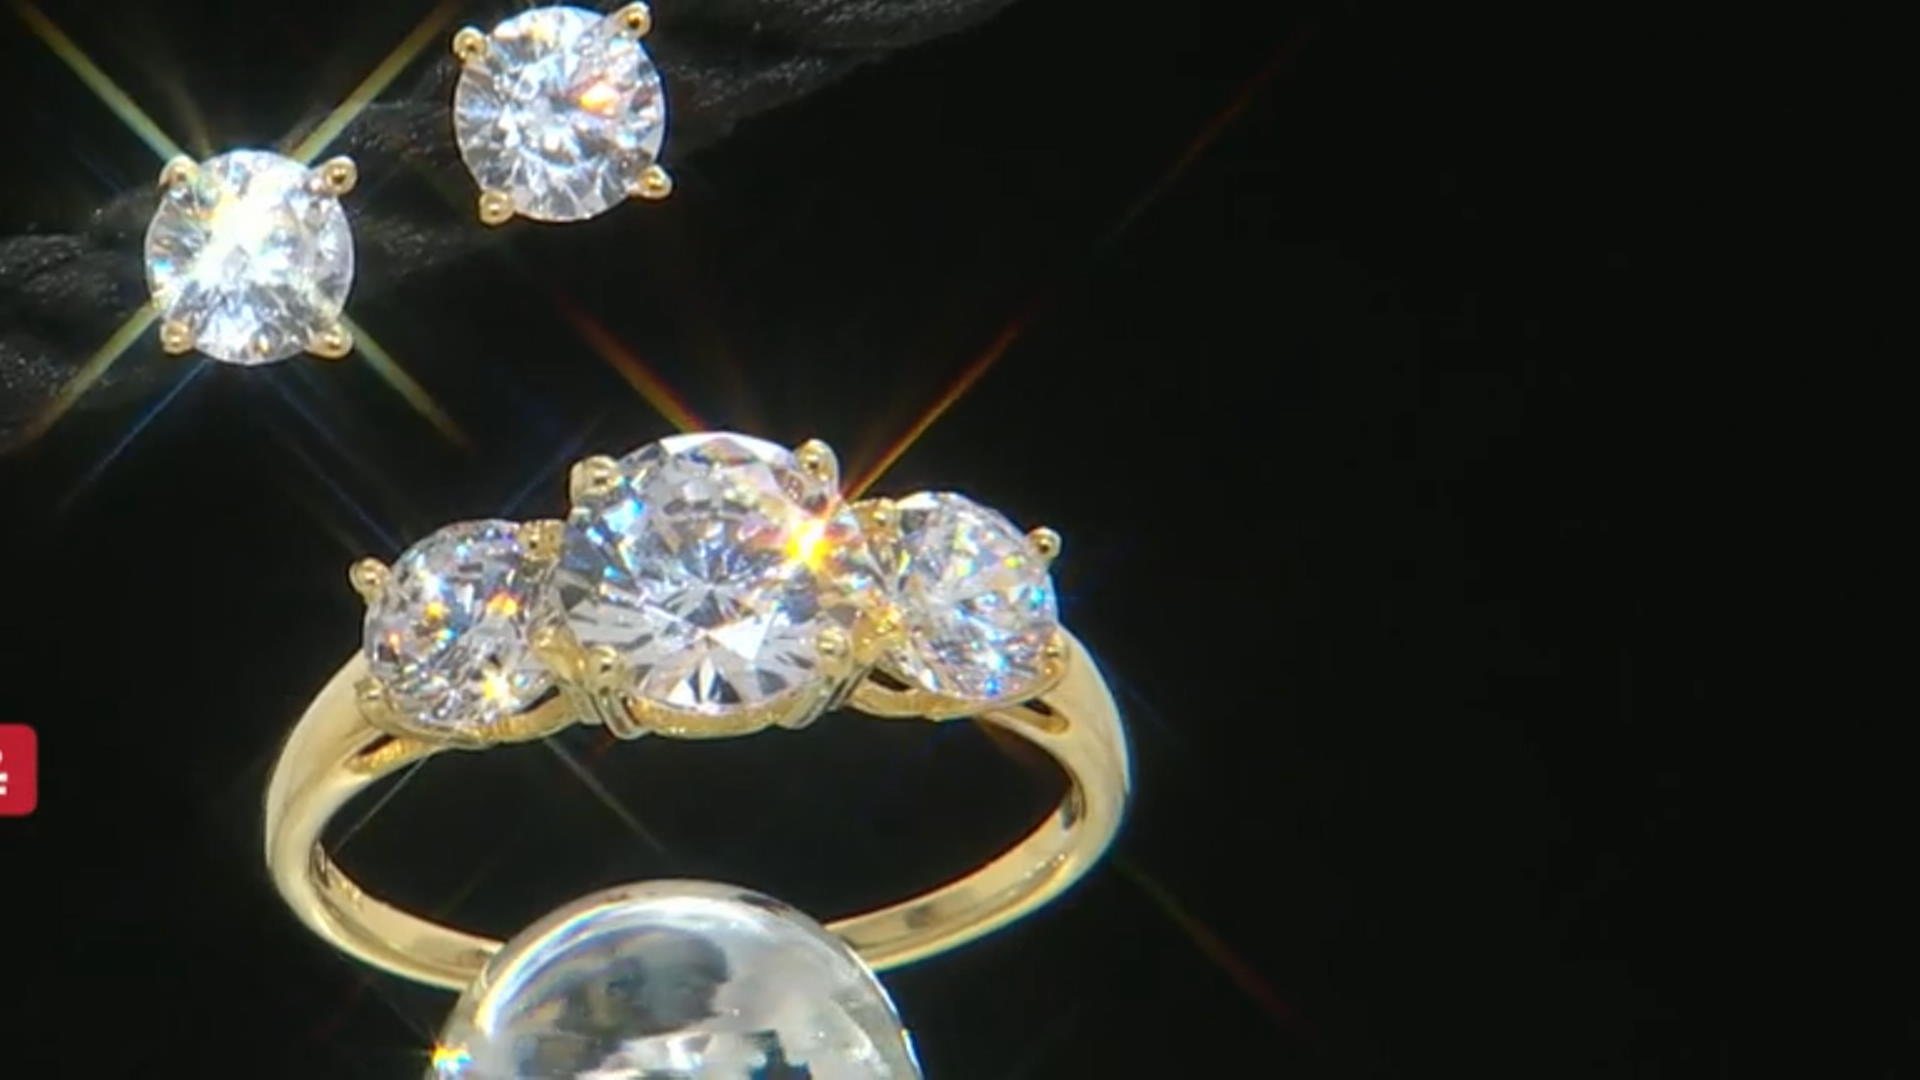 White Cubic Zirconia 18K Yellow Gold Over Silver Ring And Earrings 5.71ctw Video Thumbnail